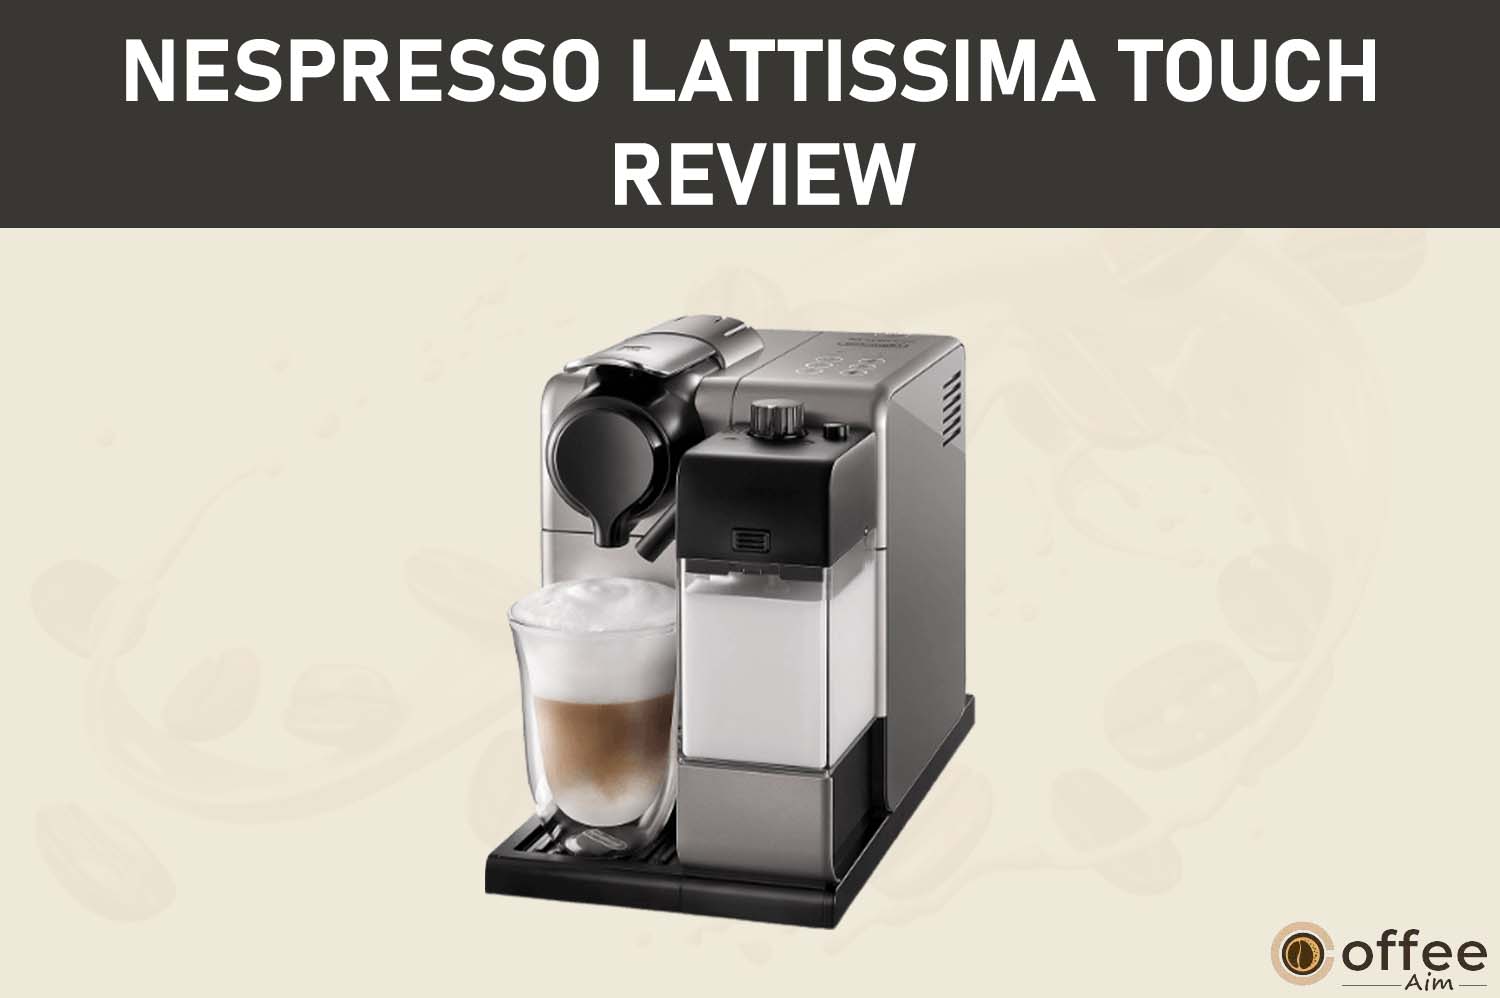 Featured image for the article "Nespresso Lattissima touch Review"